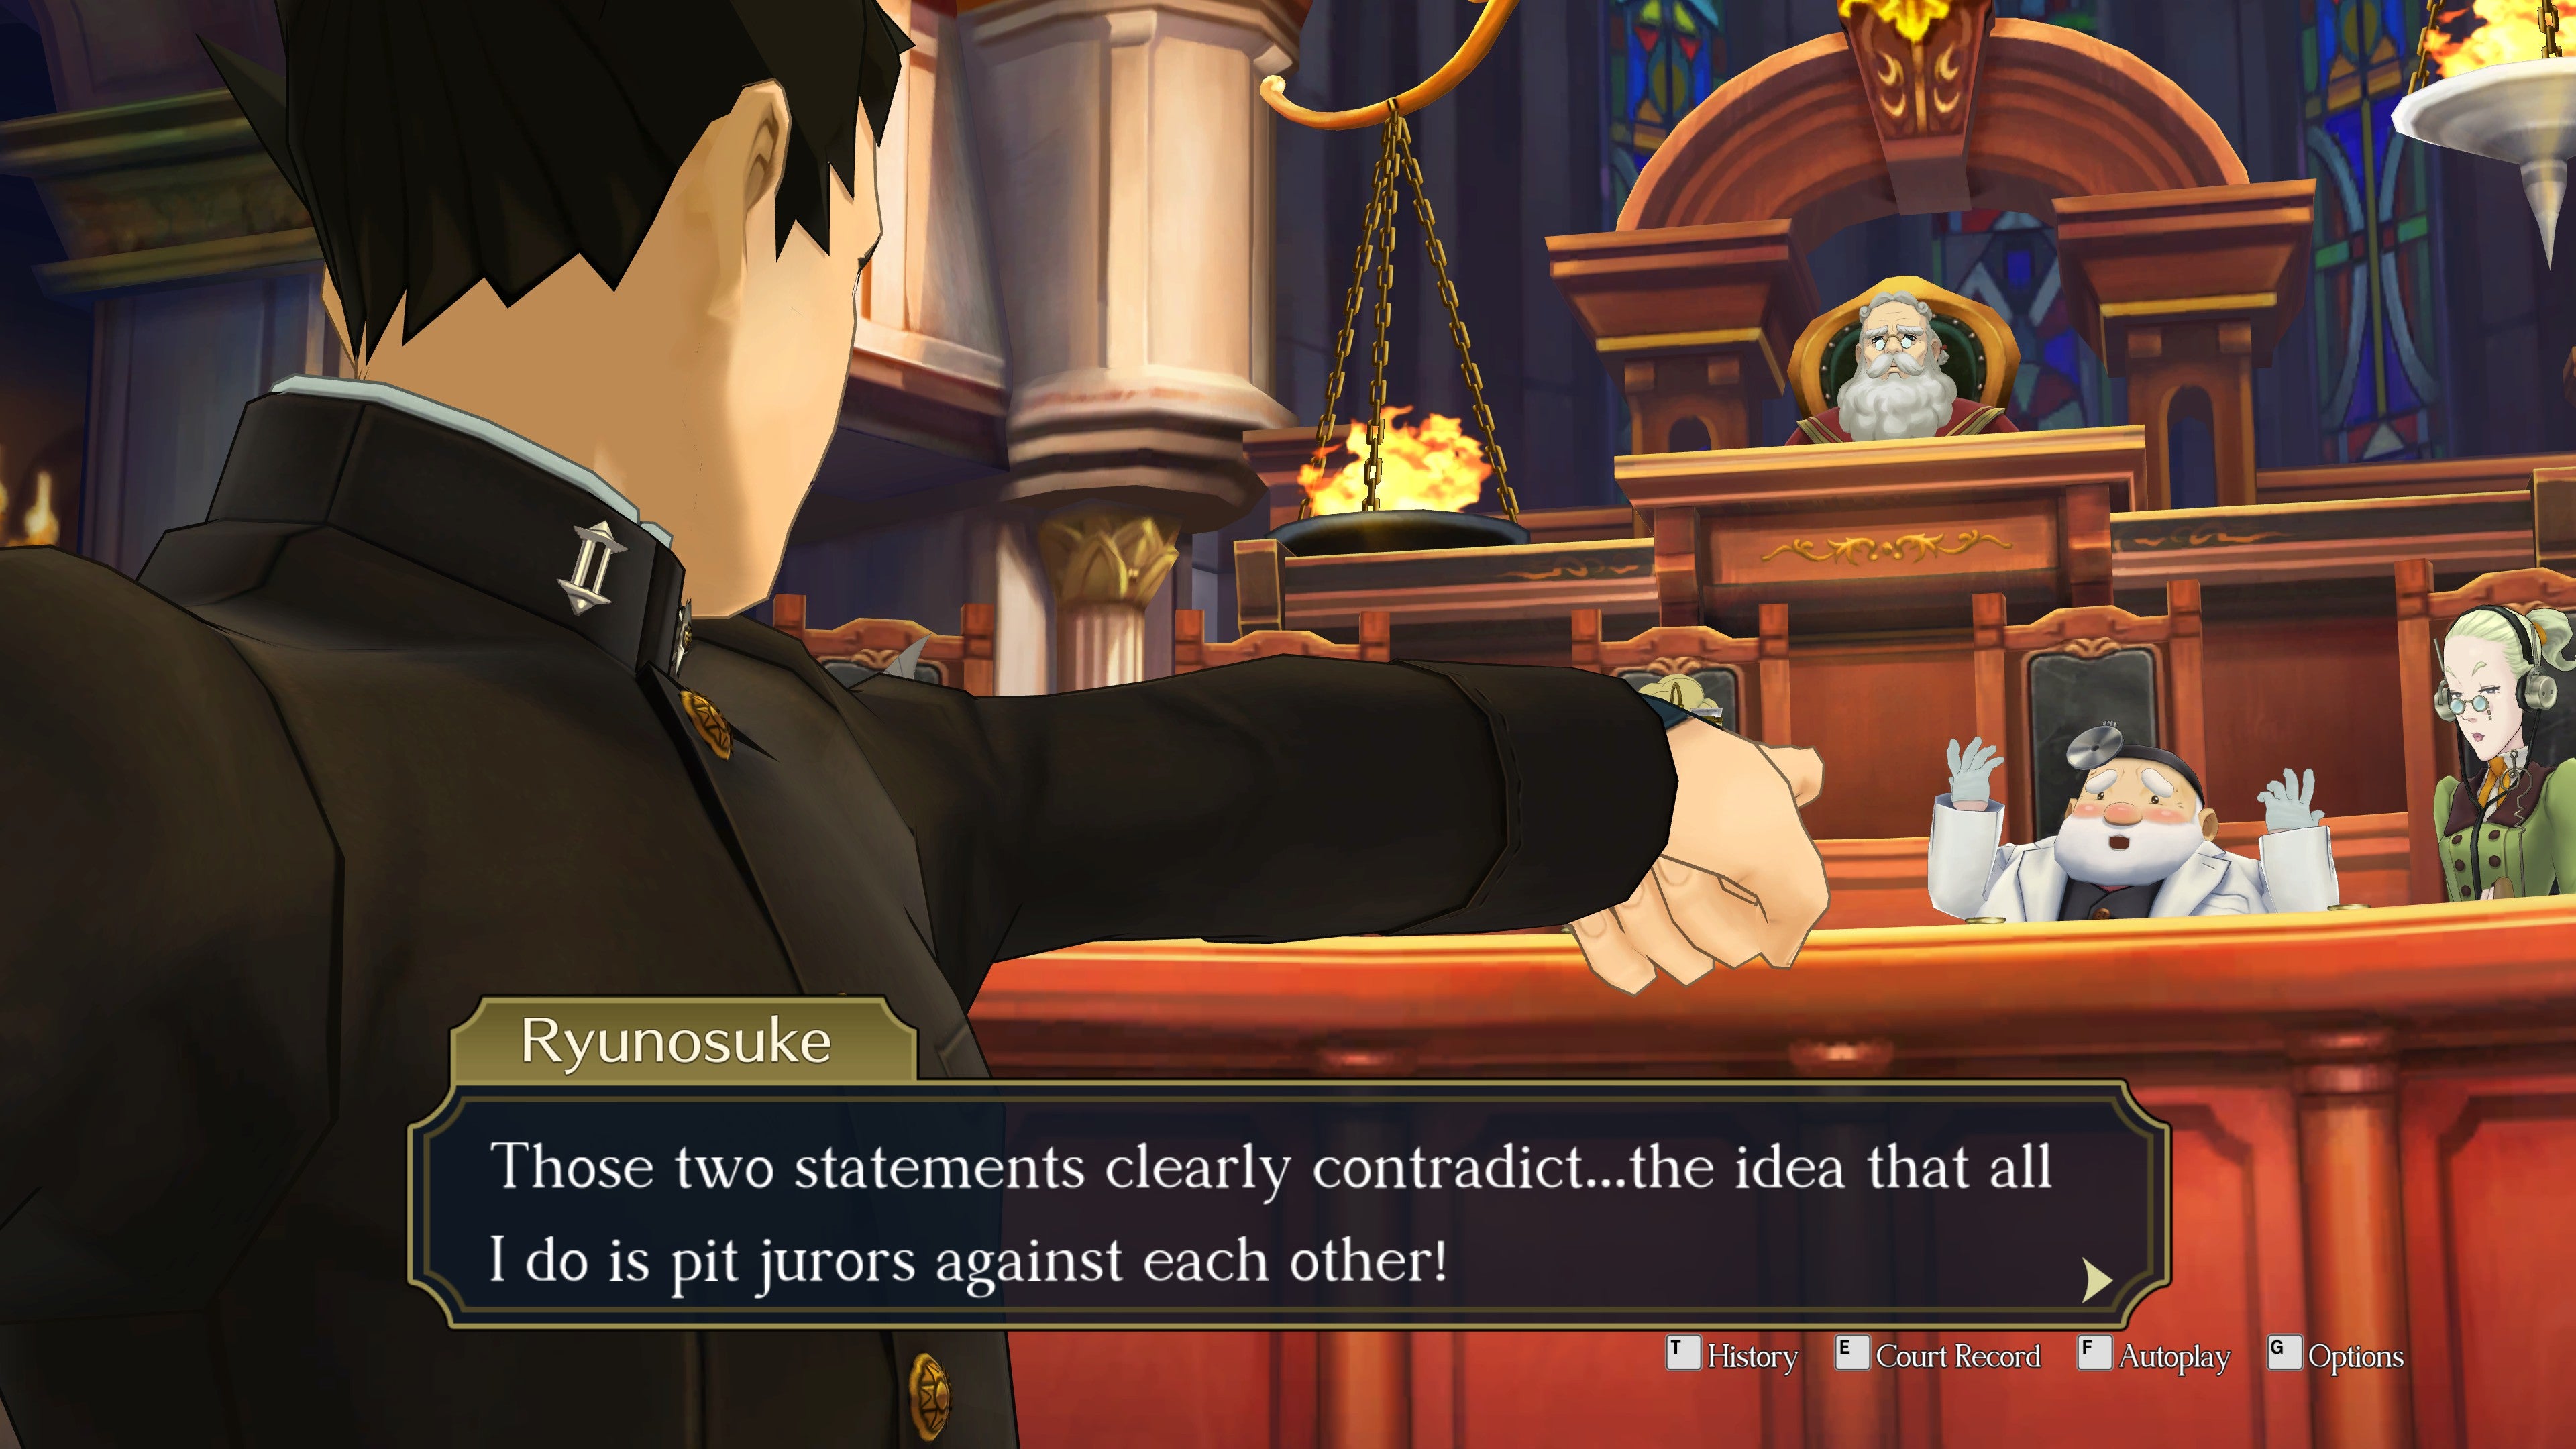 Ryunosuke points to the jury in The Great Ace Attorney Chronicles